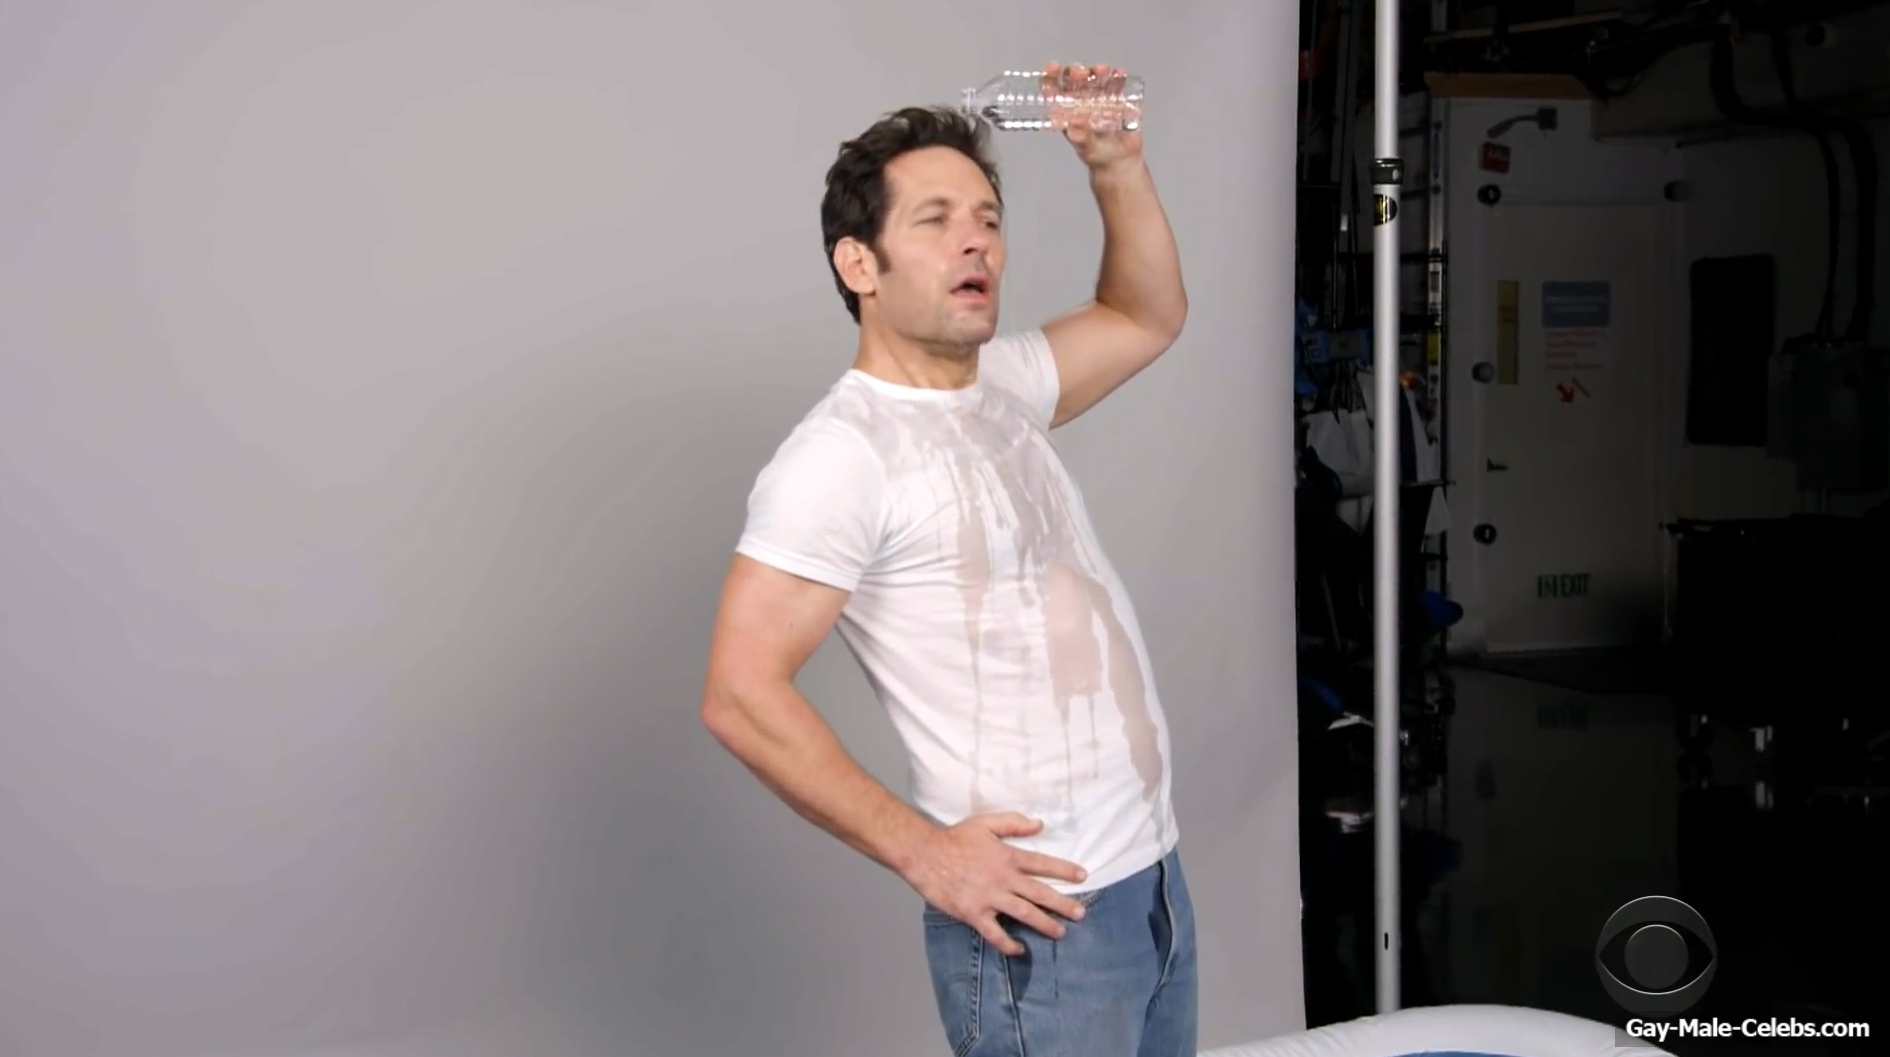 Paul Rudd Hot Man 2021 At The Rate of People Magazine